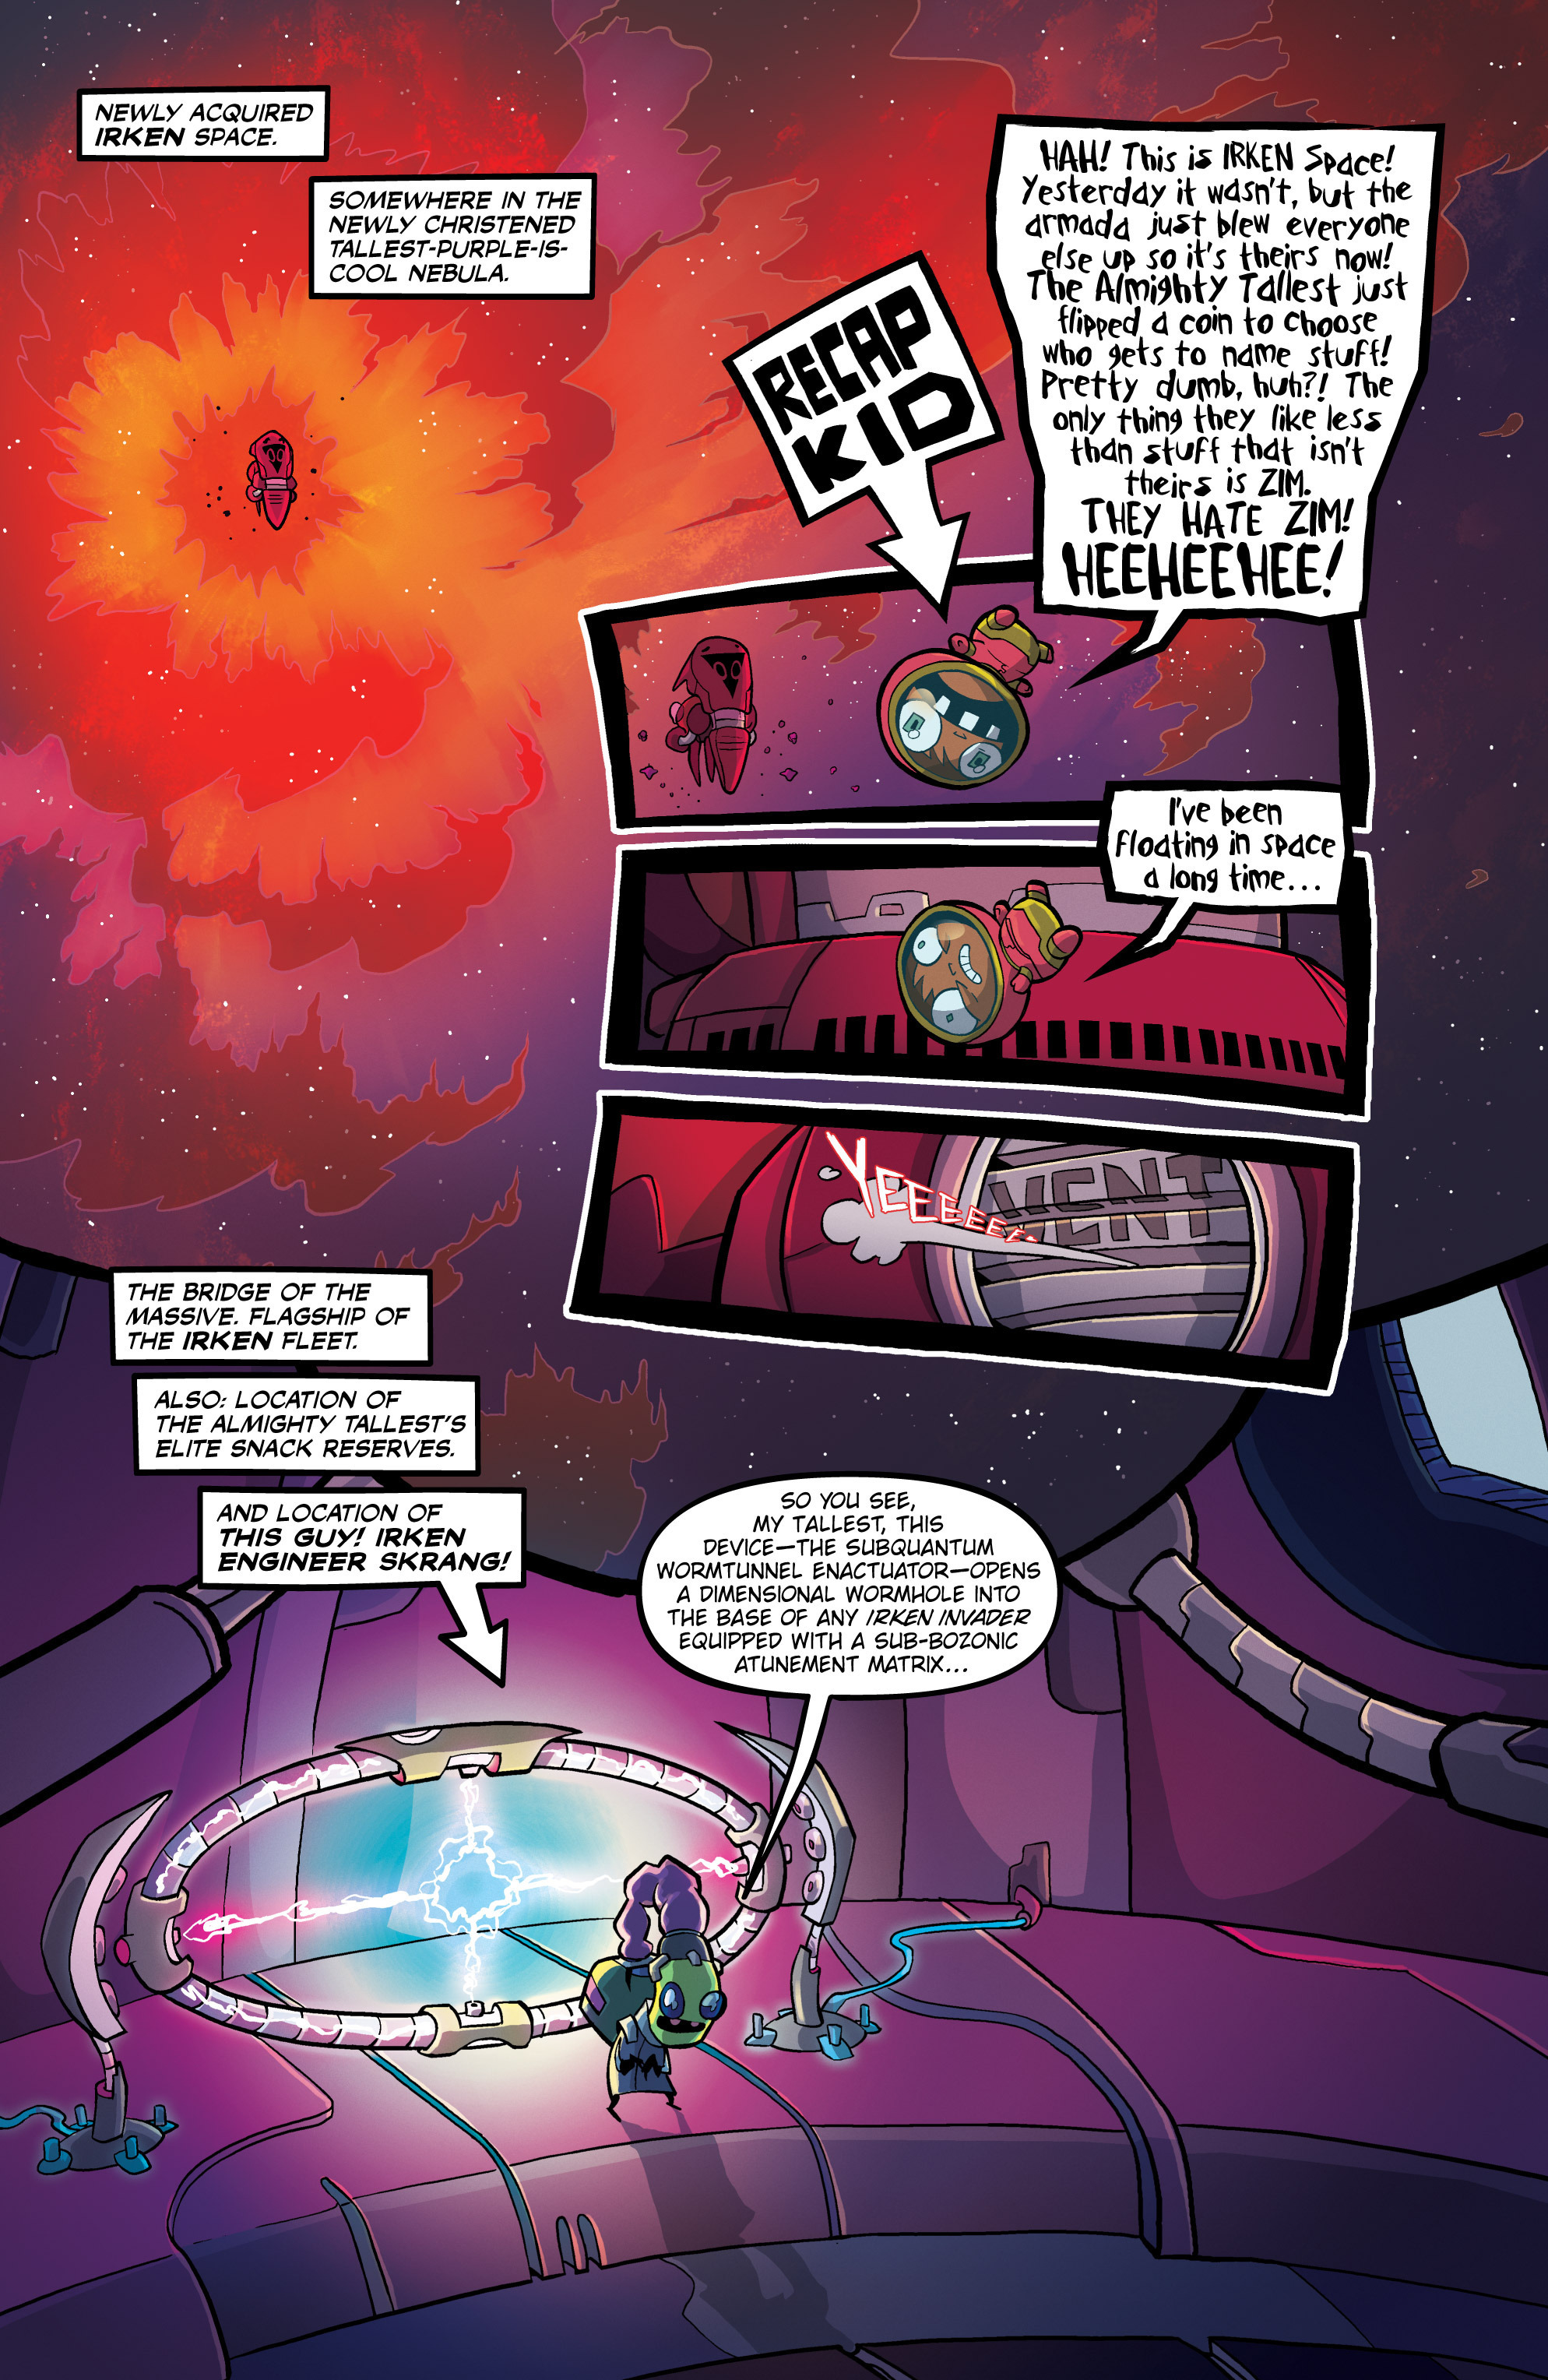 Invader Zim (2015-): Chapter 4 - Page 3